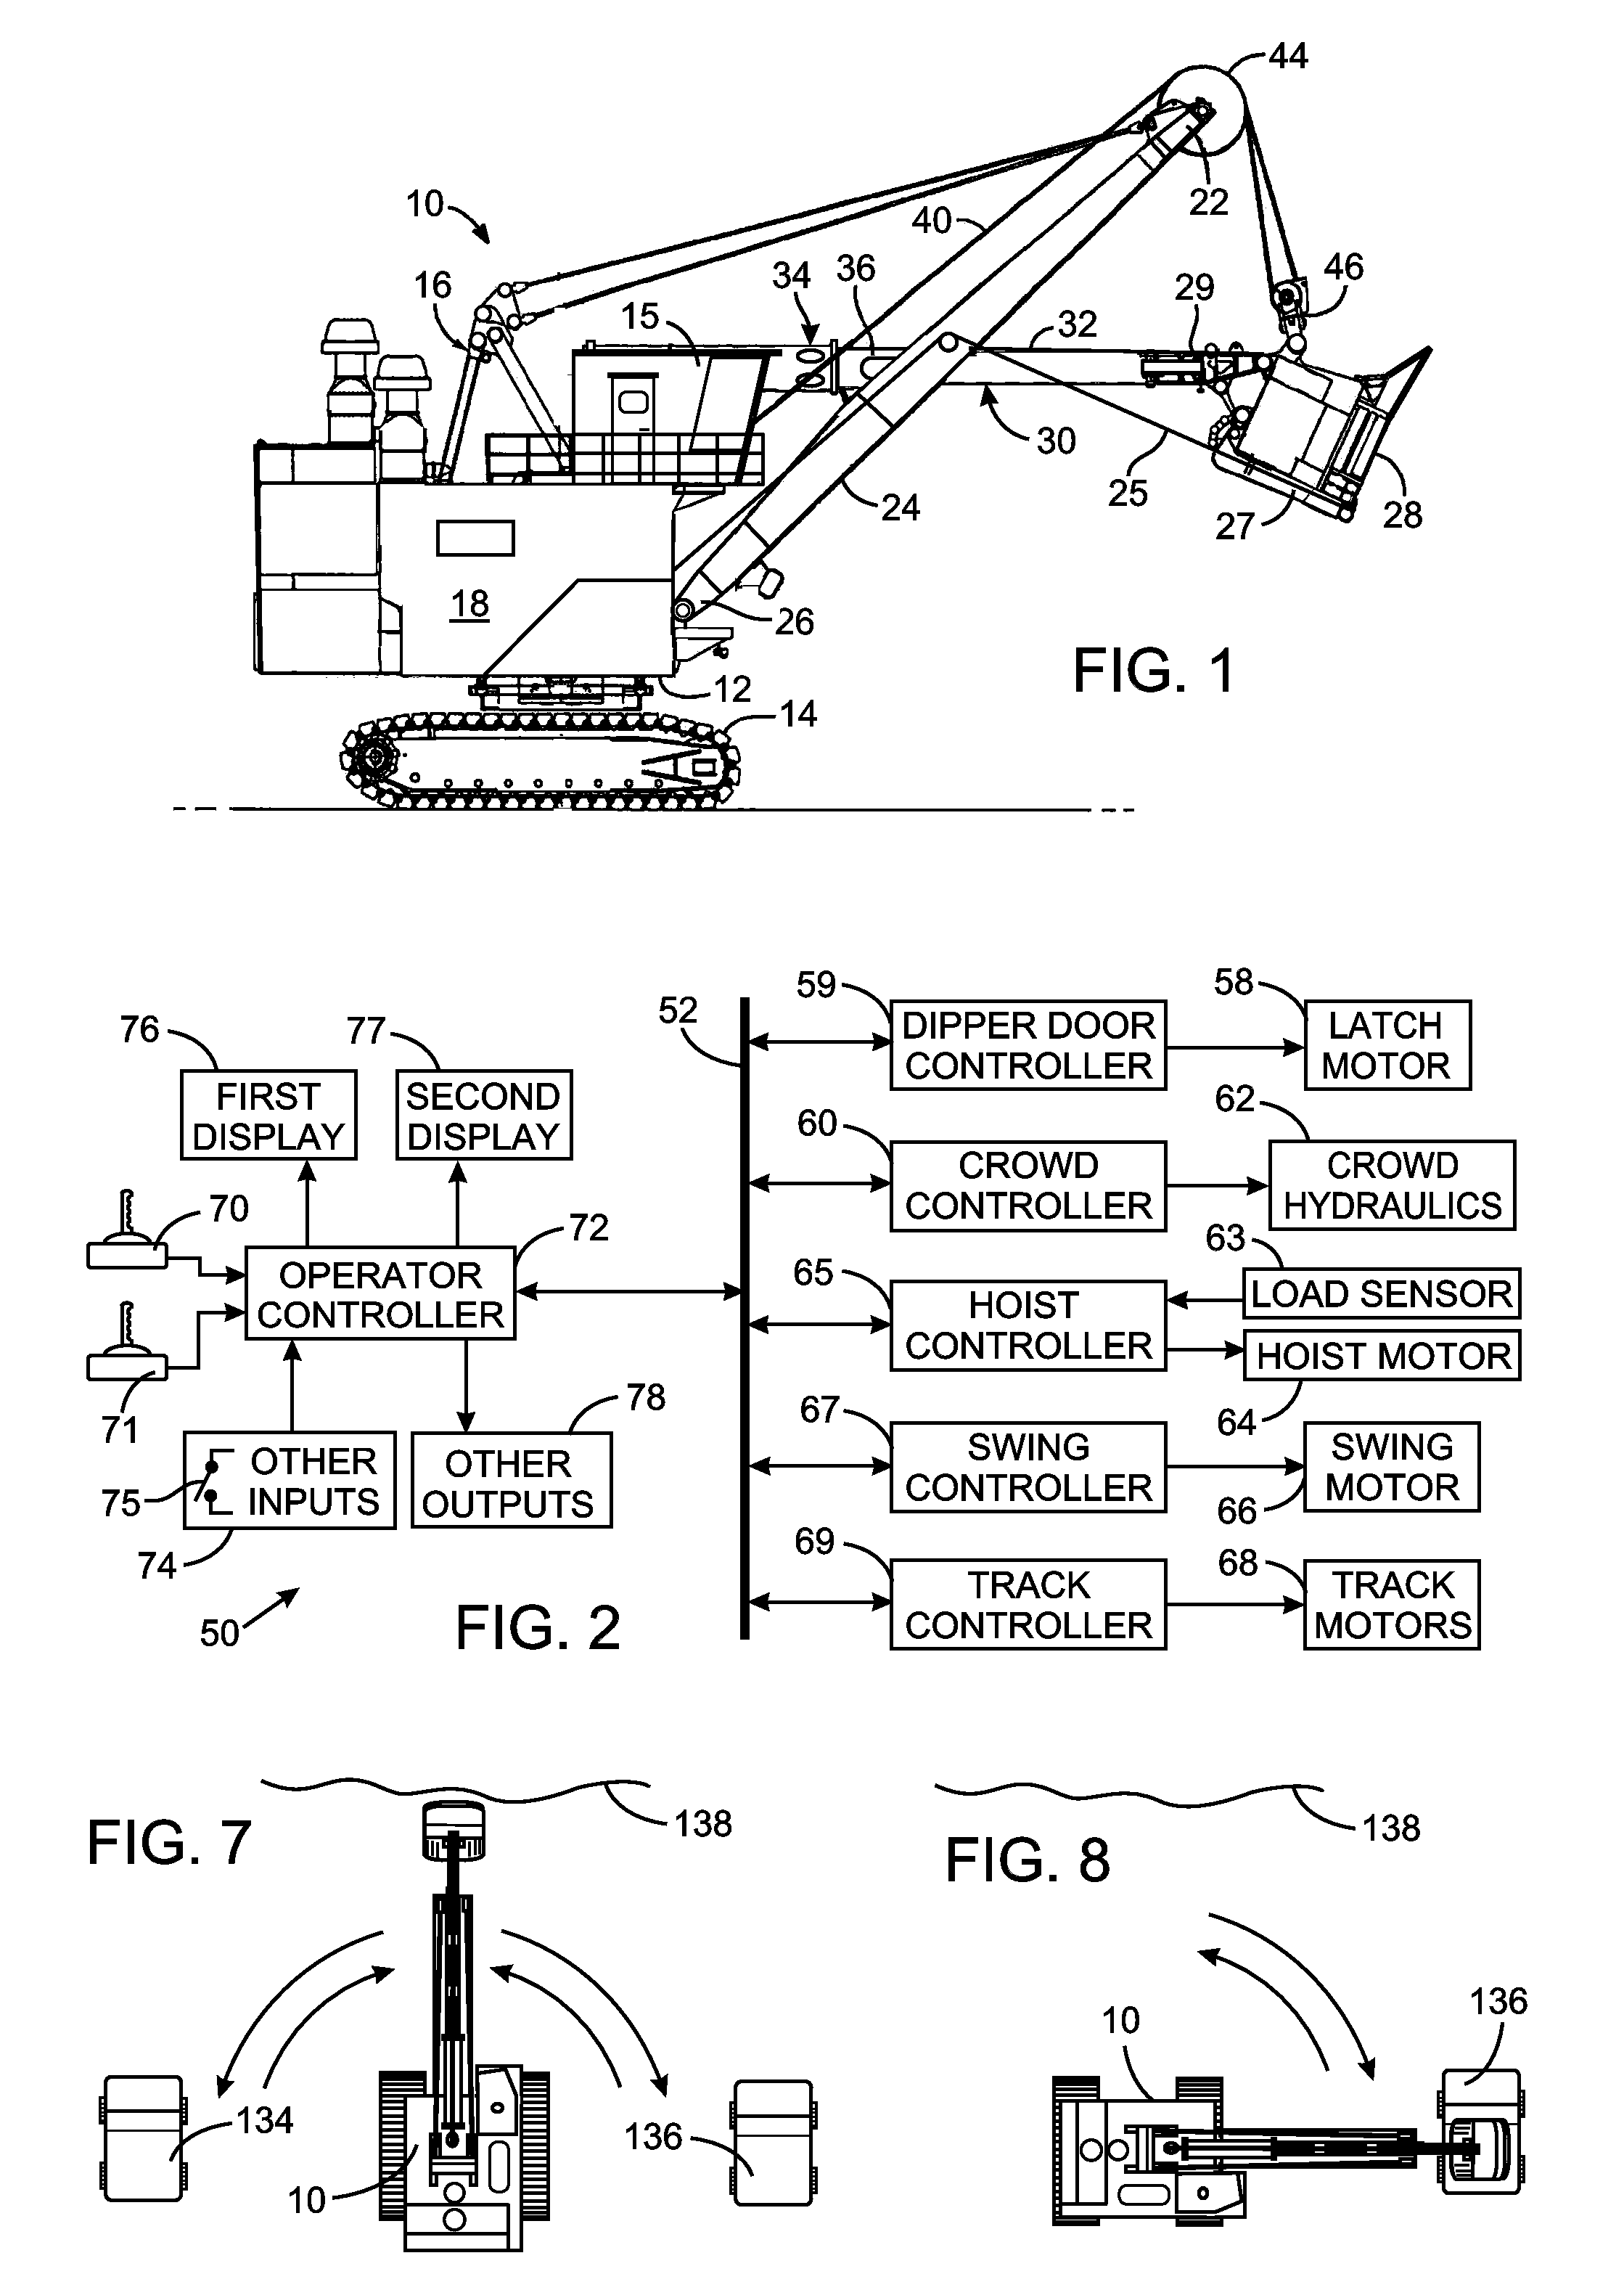 Dual Monitor Information Display System and Method for An Excavator